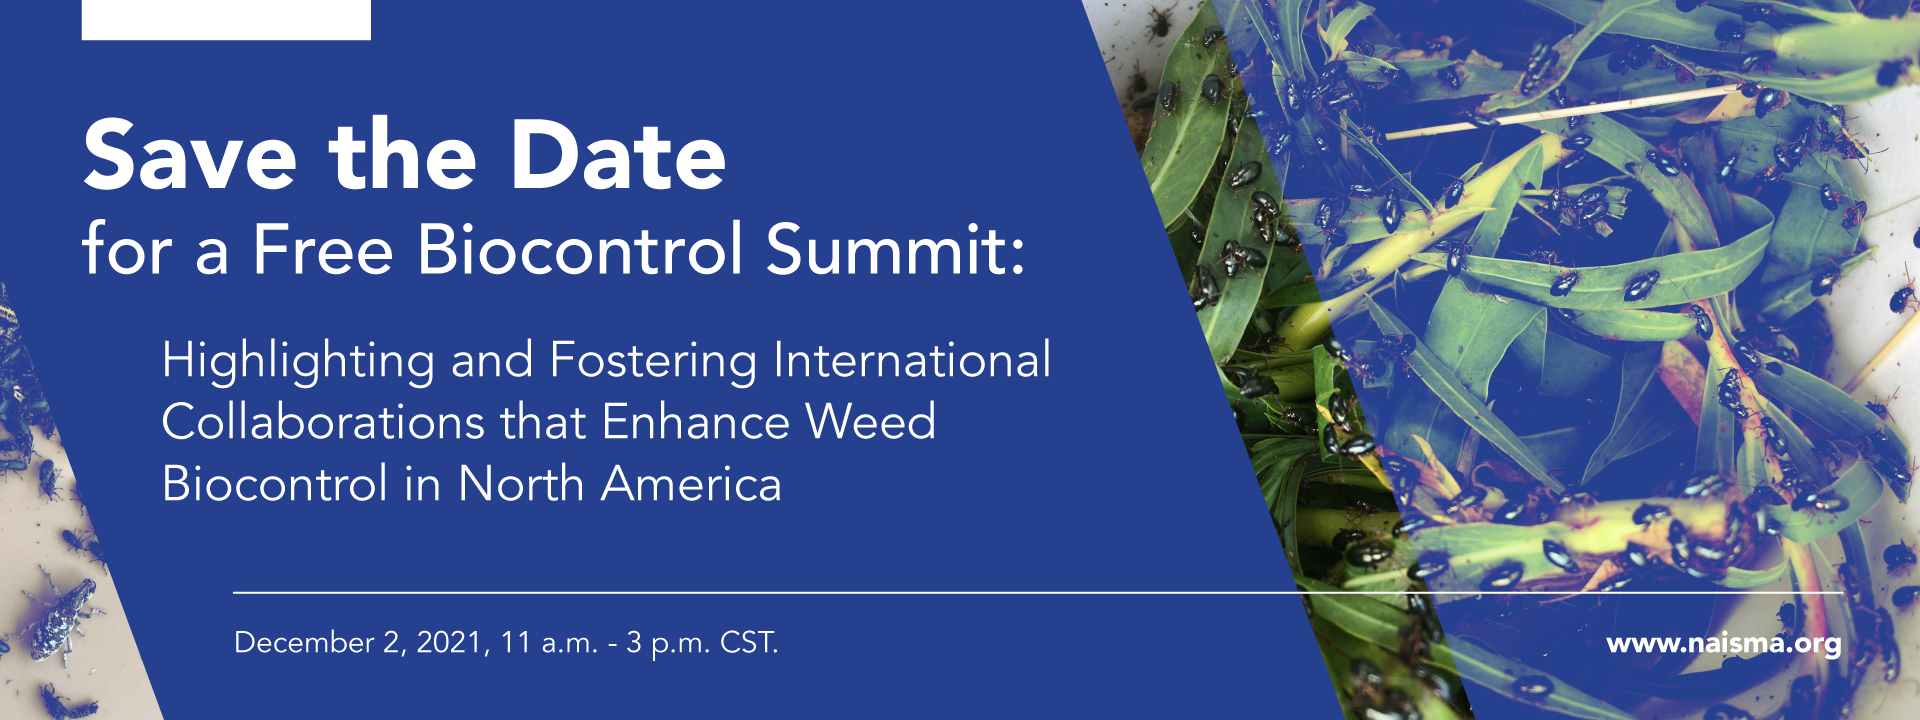 Save the Date graphic for weed biocontrol summit